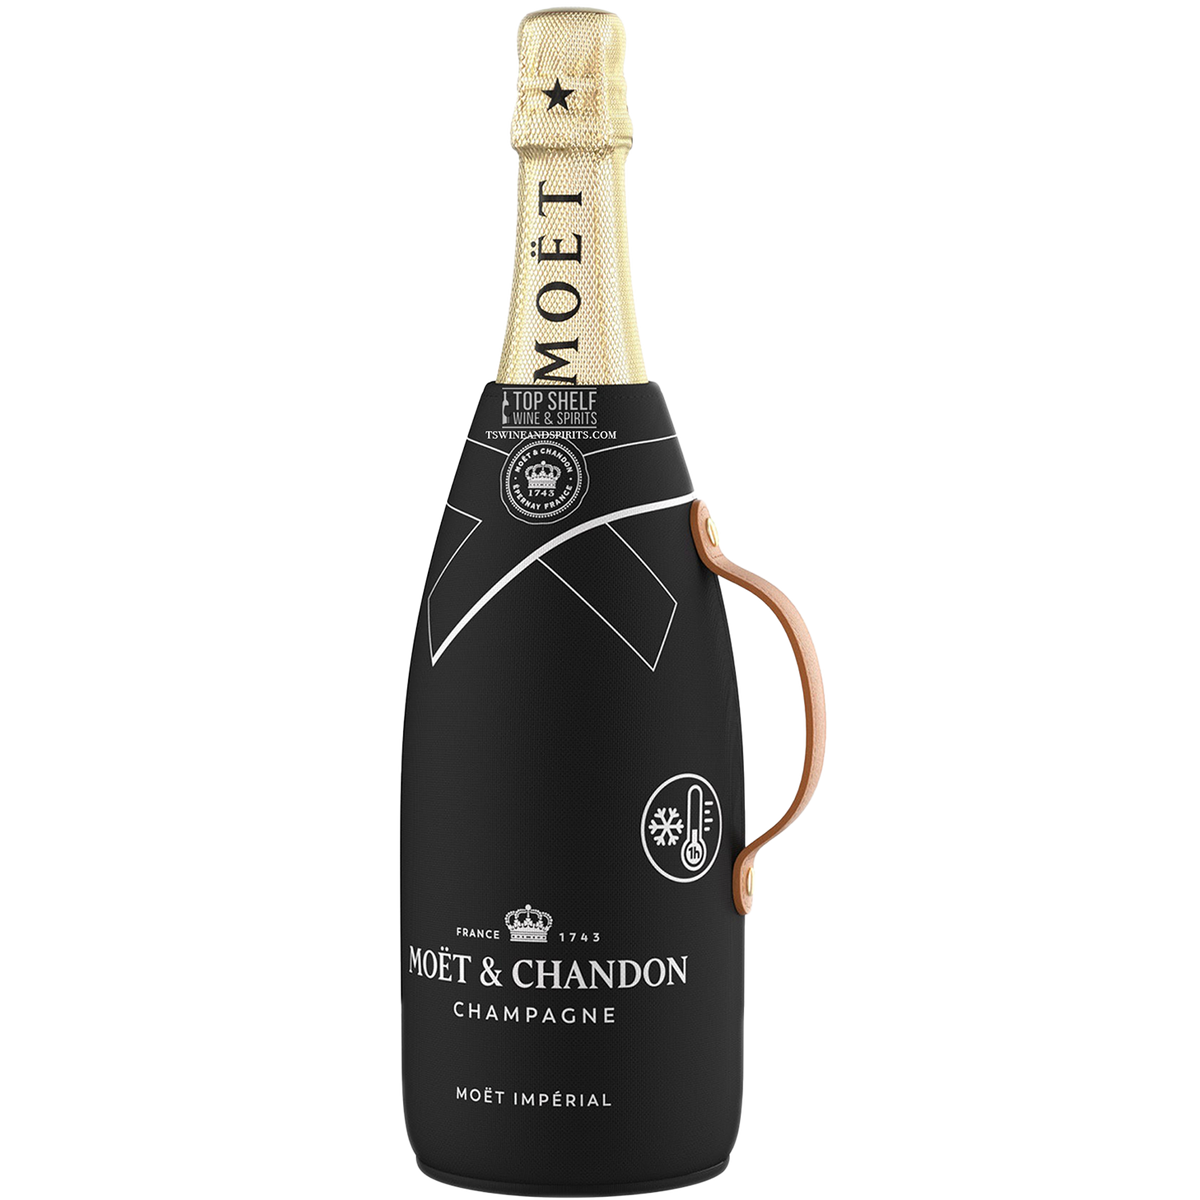 Buy MOET & CHANDON CHAMPAGNE NECTAR IMPERIAL FRANCE 750ML